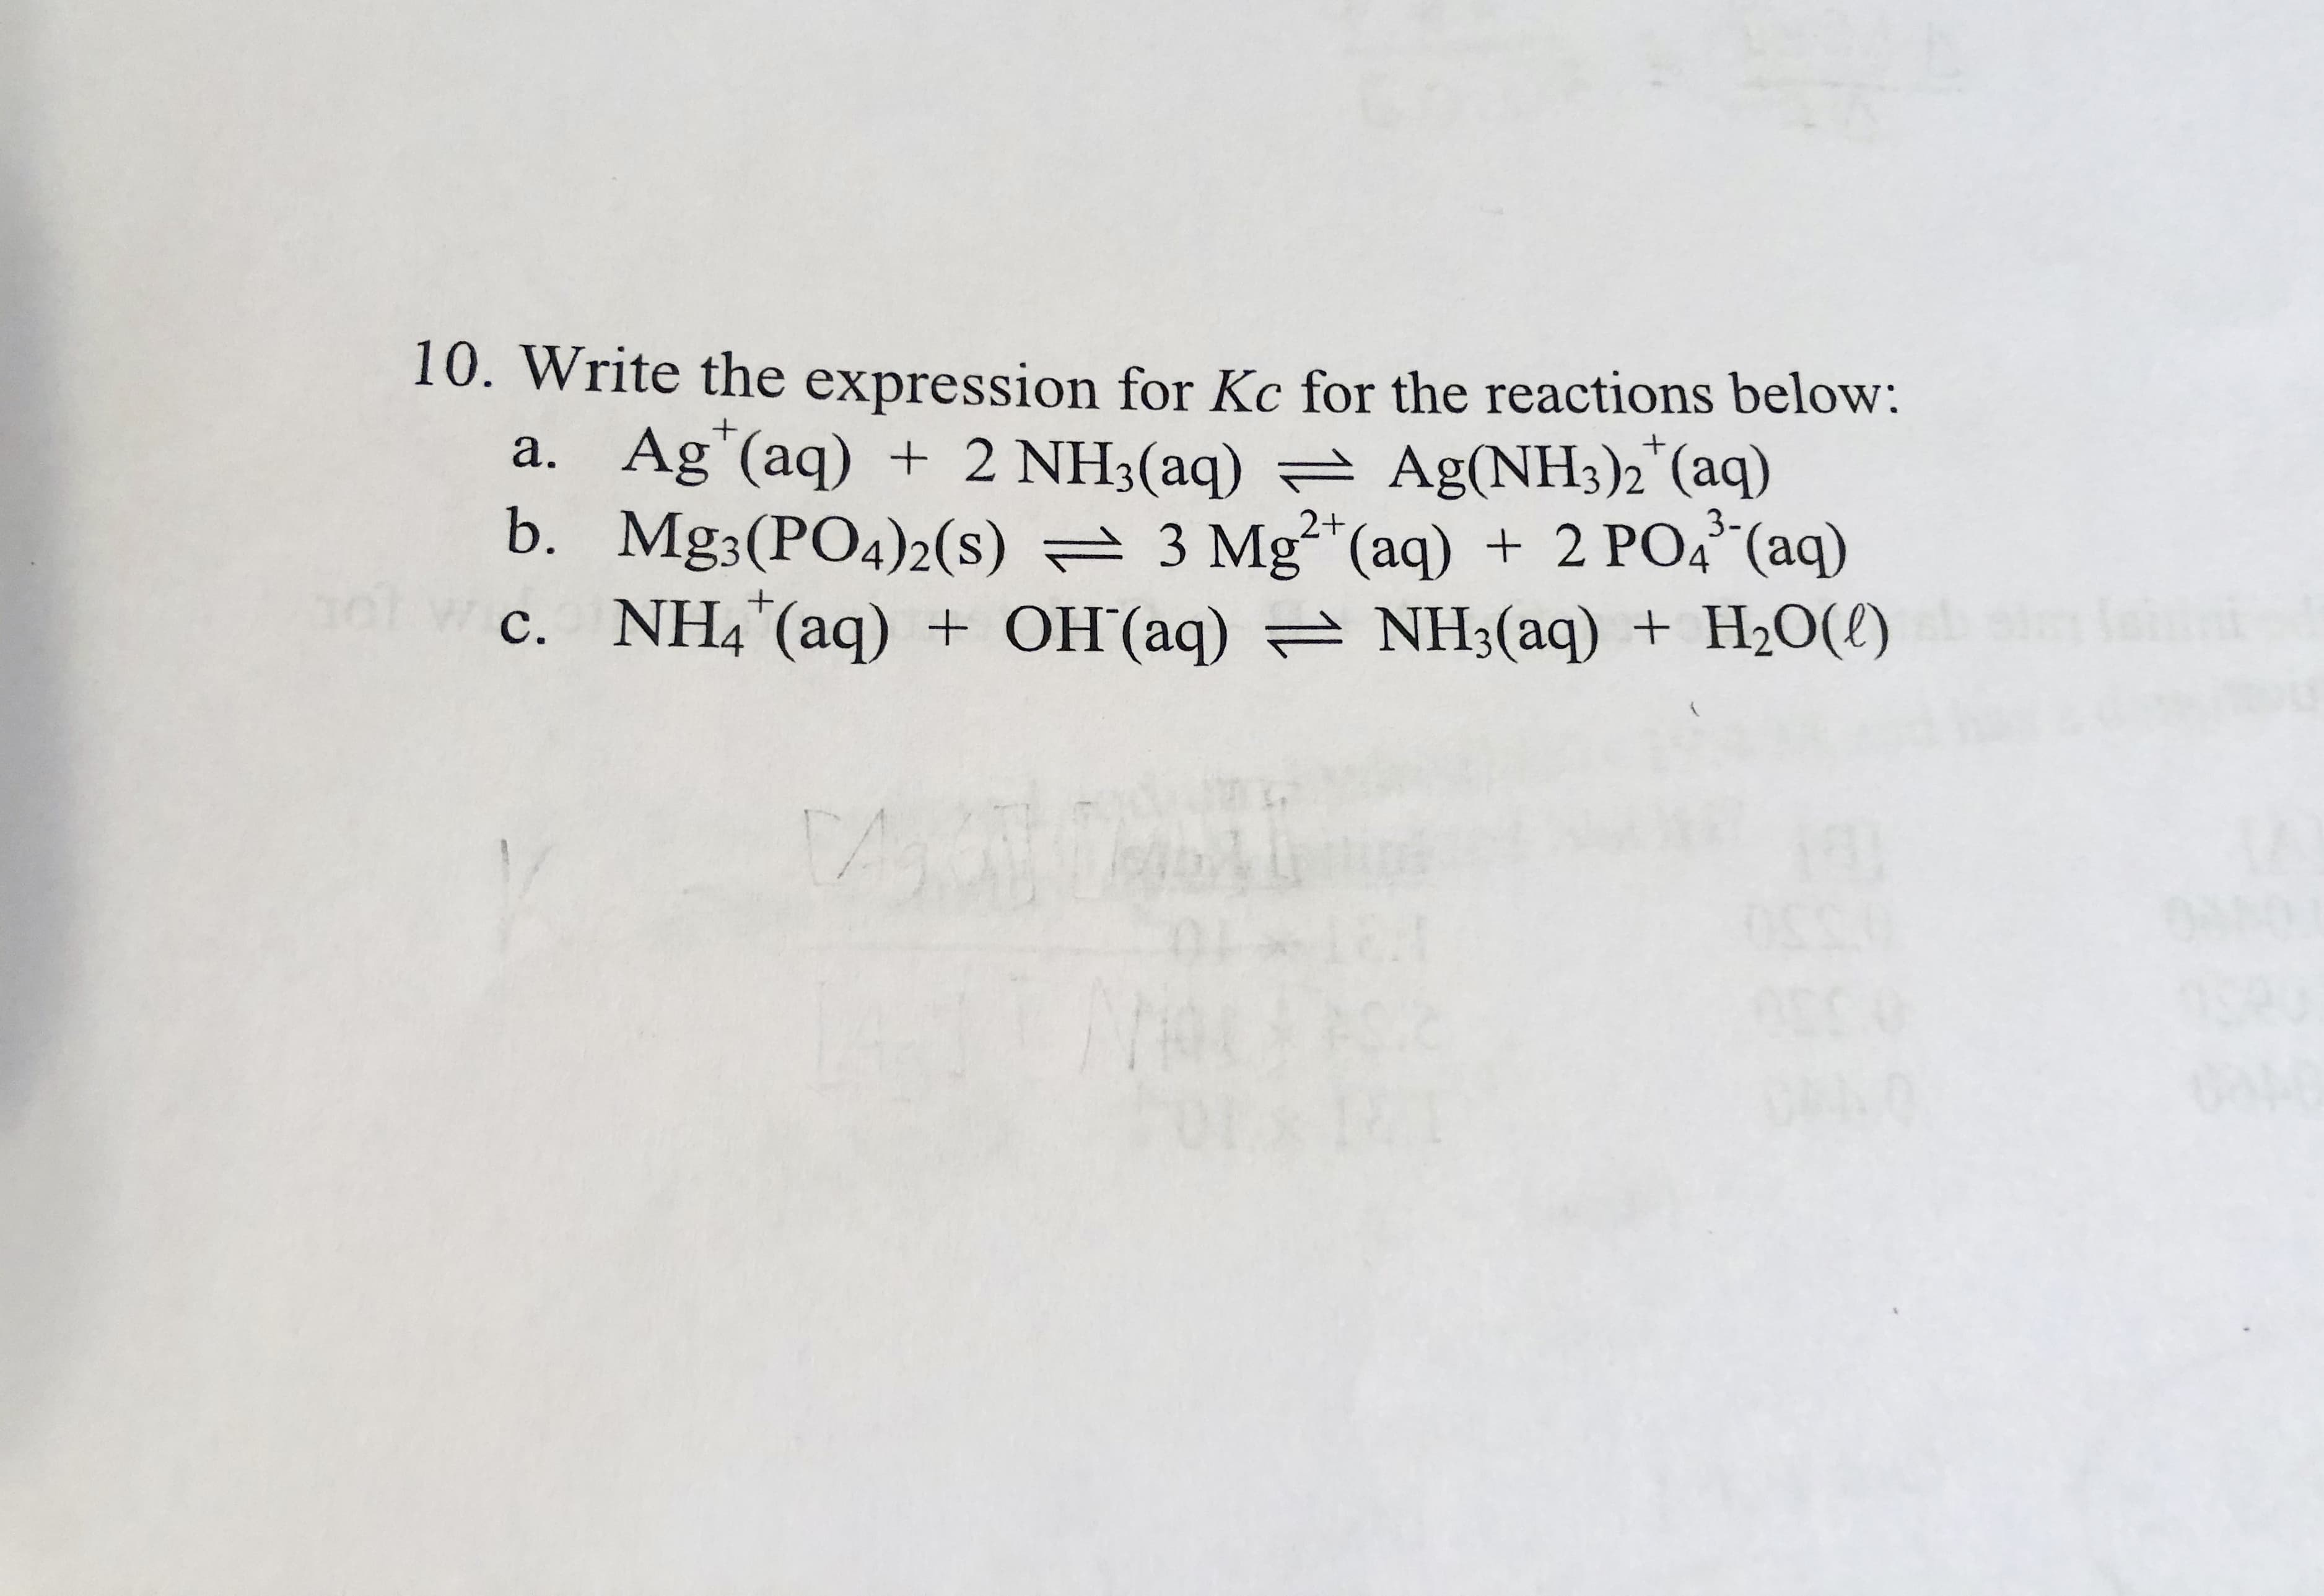 Write the expression for Kc for the reactions below:
a. Ag"(aq) + 2 NH3(aq) = Ag(NH3)2"(aq)
b. Mg3(PO4)2(s) = 3 Mg²*(aq) + 2 PO4* (aq)
c. NH4"(aq) + OH'(aq) = NH3(aq) + H20(l)
3-
